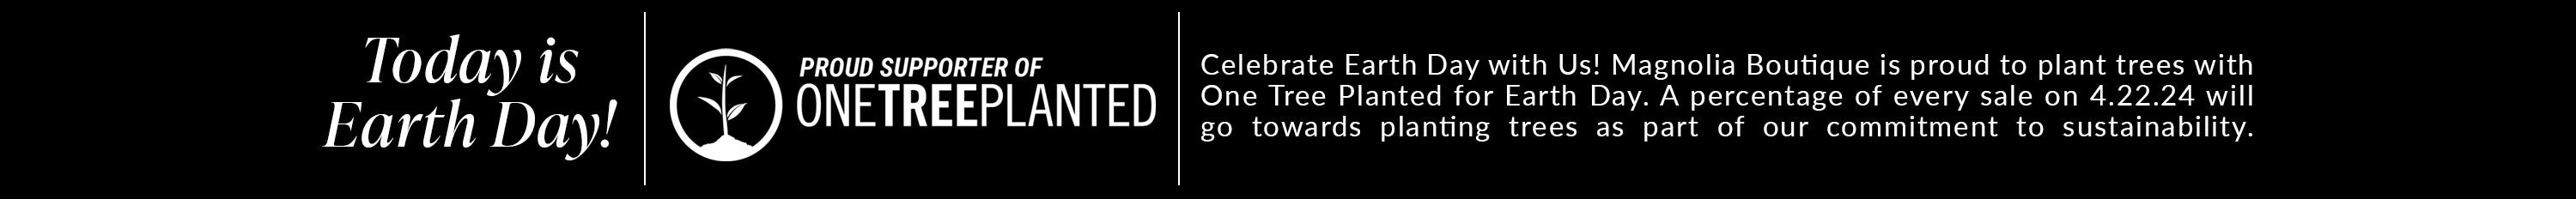 today is earth day! Celebrate Earth Day with Us! Magnolia Boutique is proud to plant trees with One Tree Planted for Earth Day. A percentage of every sale on 4.22.24 will go towards planting trees as part of our commitment to sustainability.   